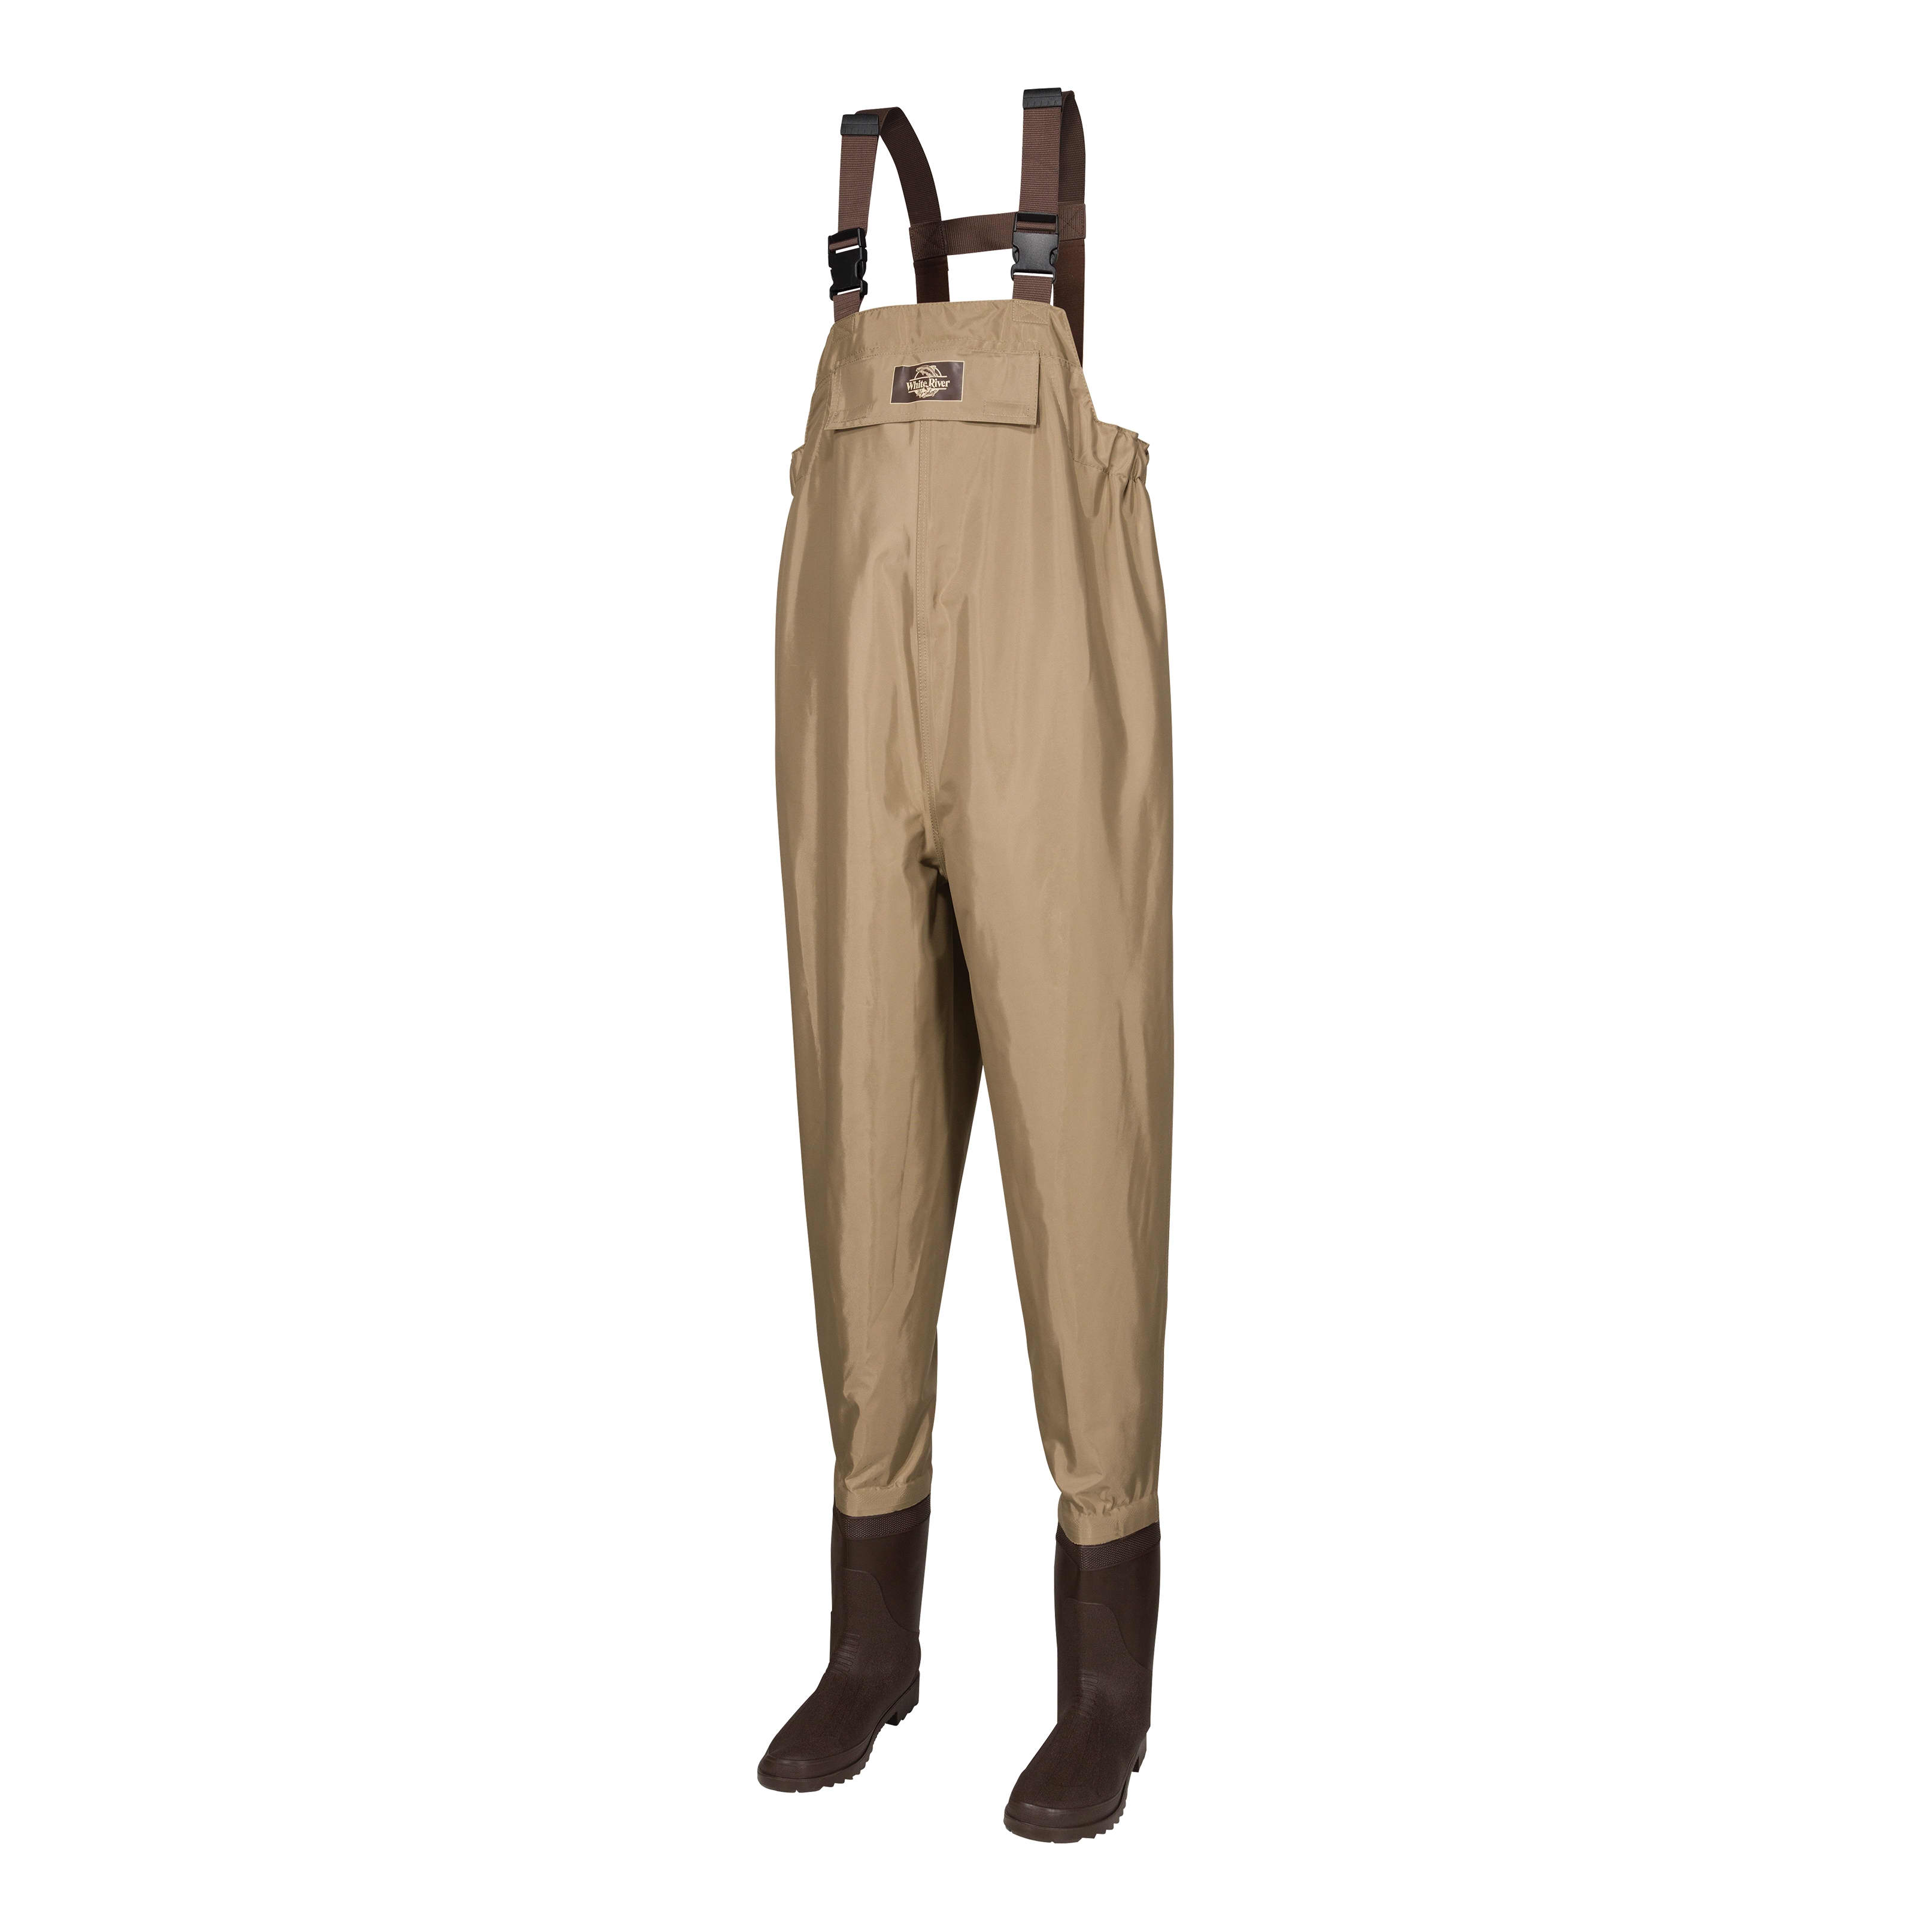 Cabela’s Chest Fly Fishing Khaki Waders With Brown Rubber Boots Men’s Size 8